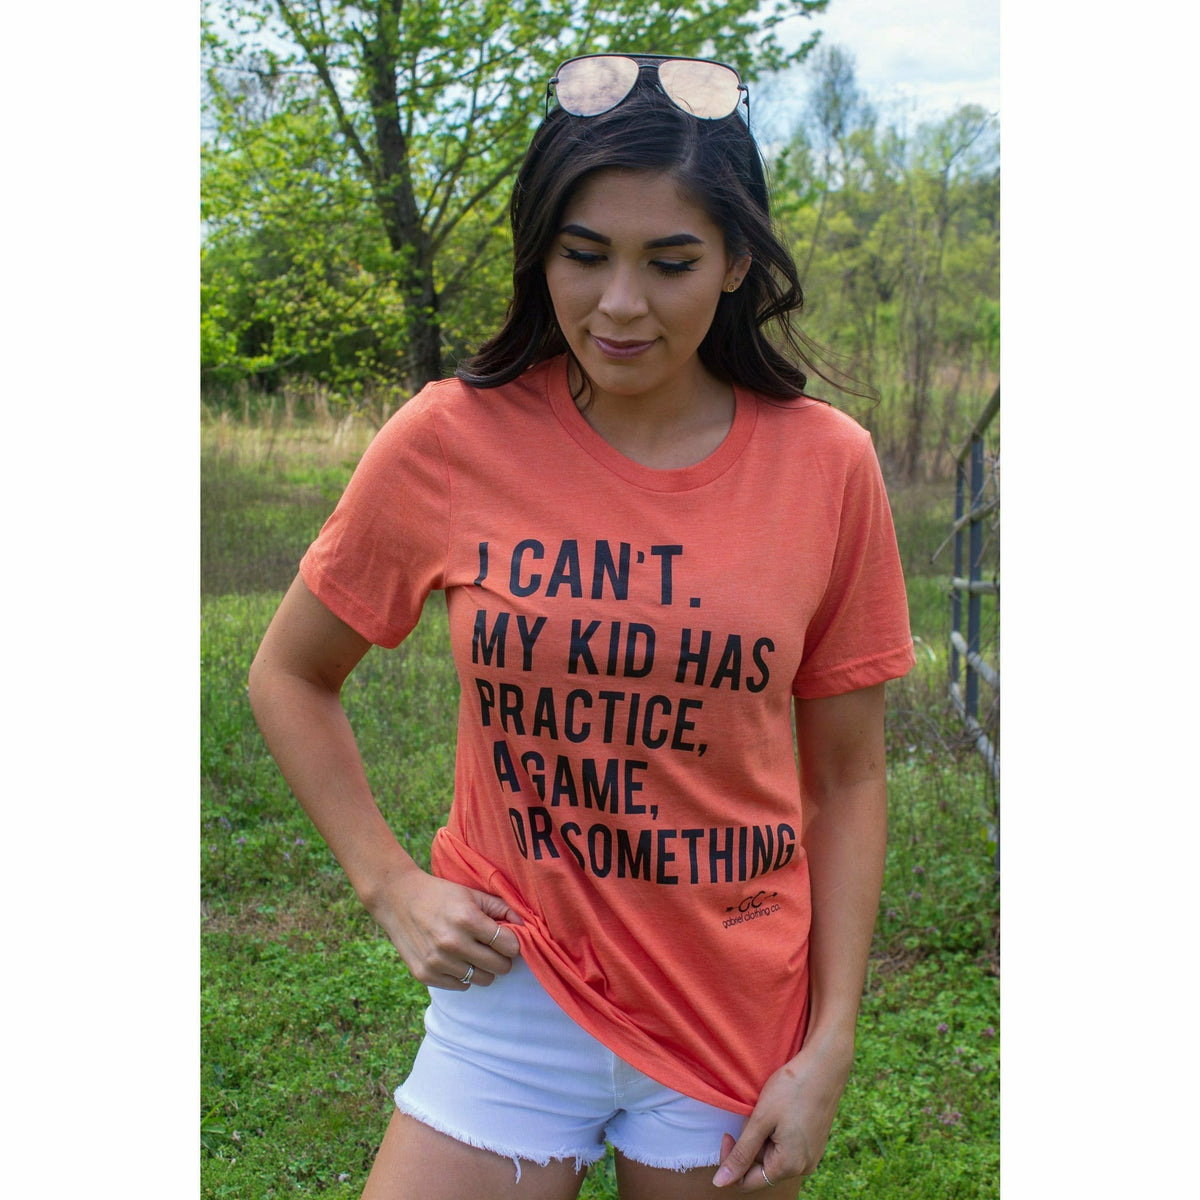 I can&#39;t. My Kid has practice, a game or something Tee  (more colors)